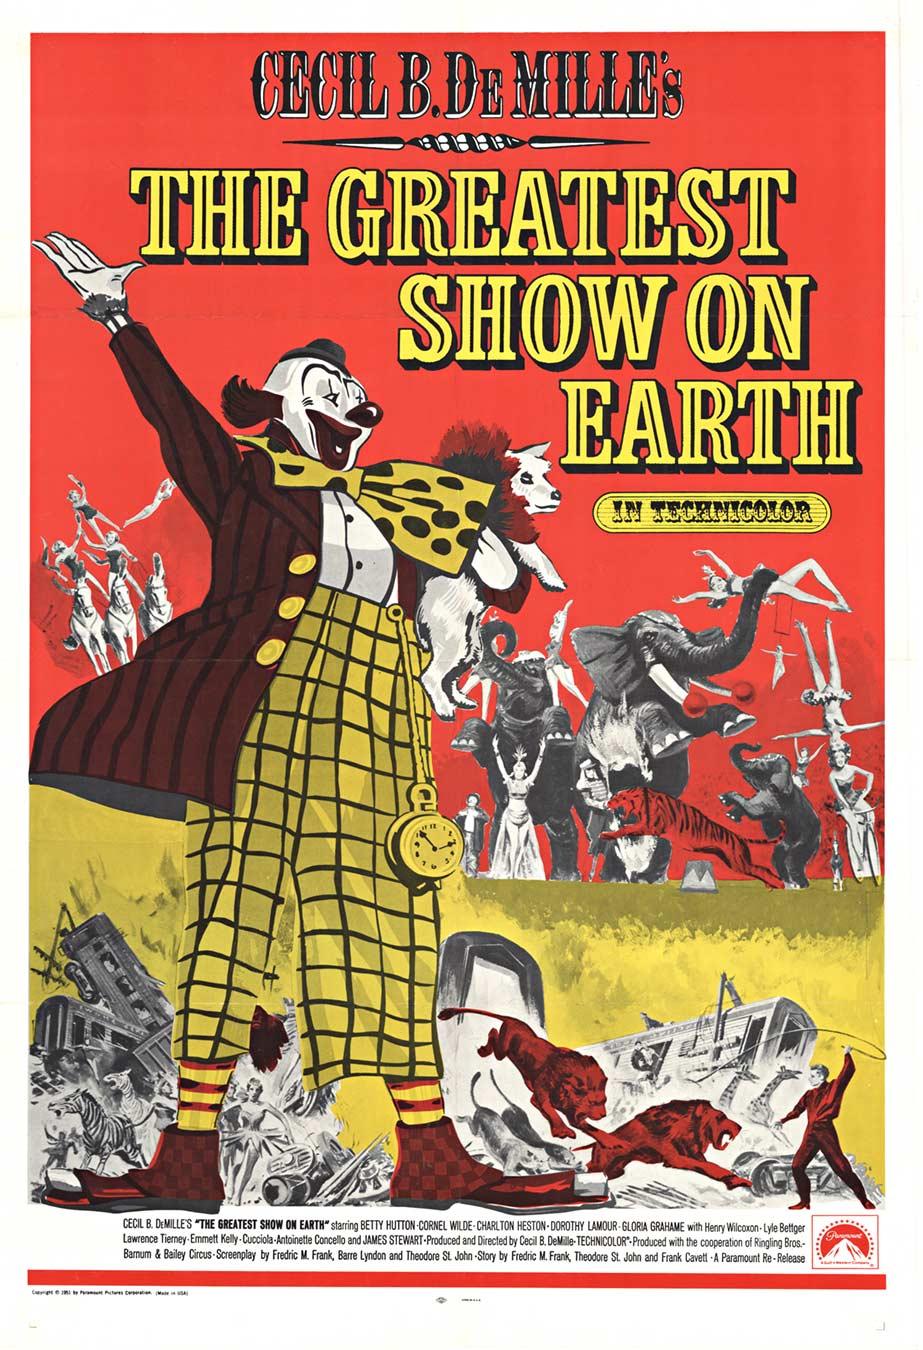 Unknown Figurative Print - Original "The Greatest Show on Earth" 1951 vintage movie poster US 1-sheet